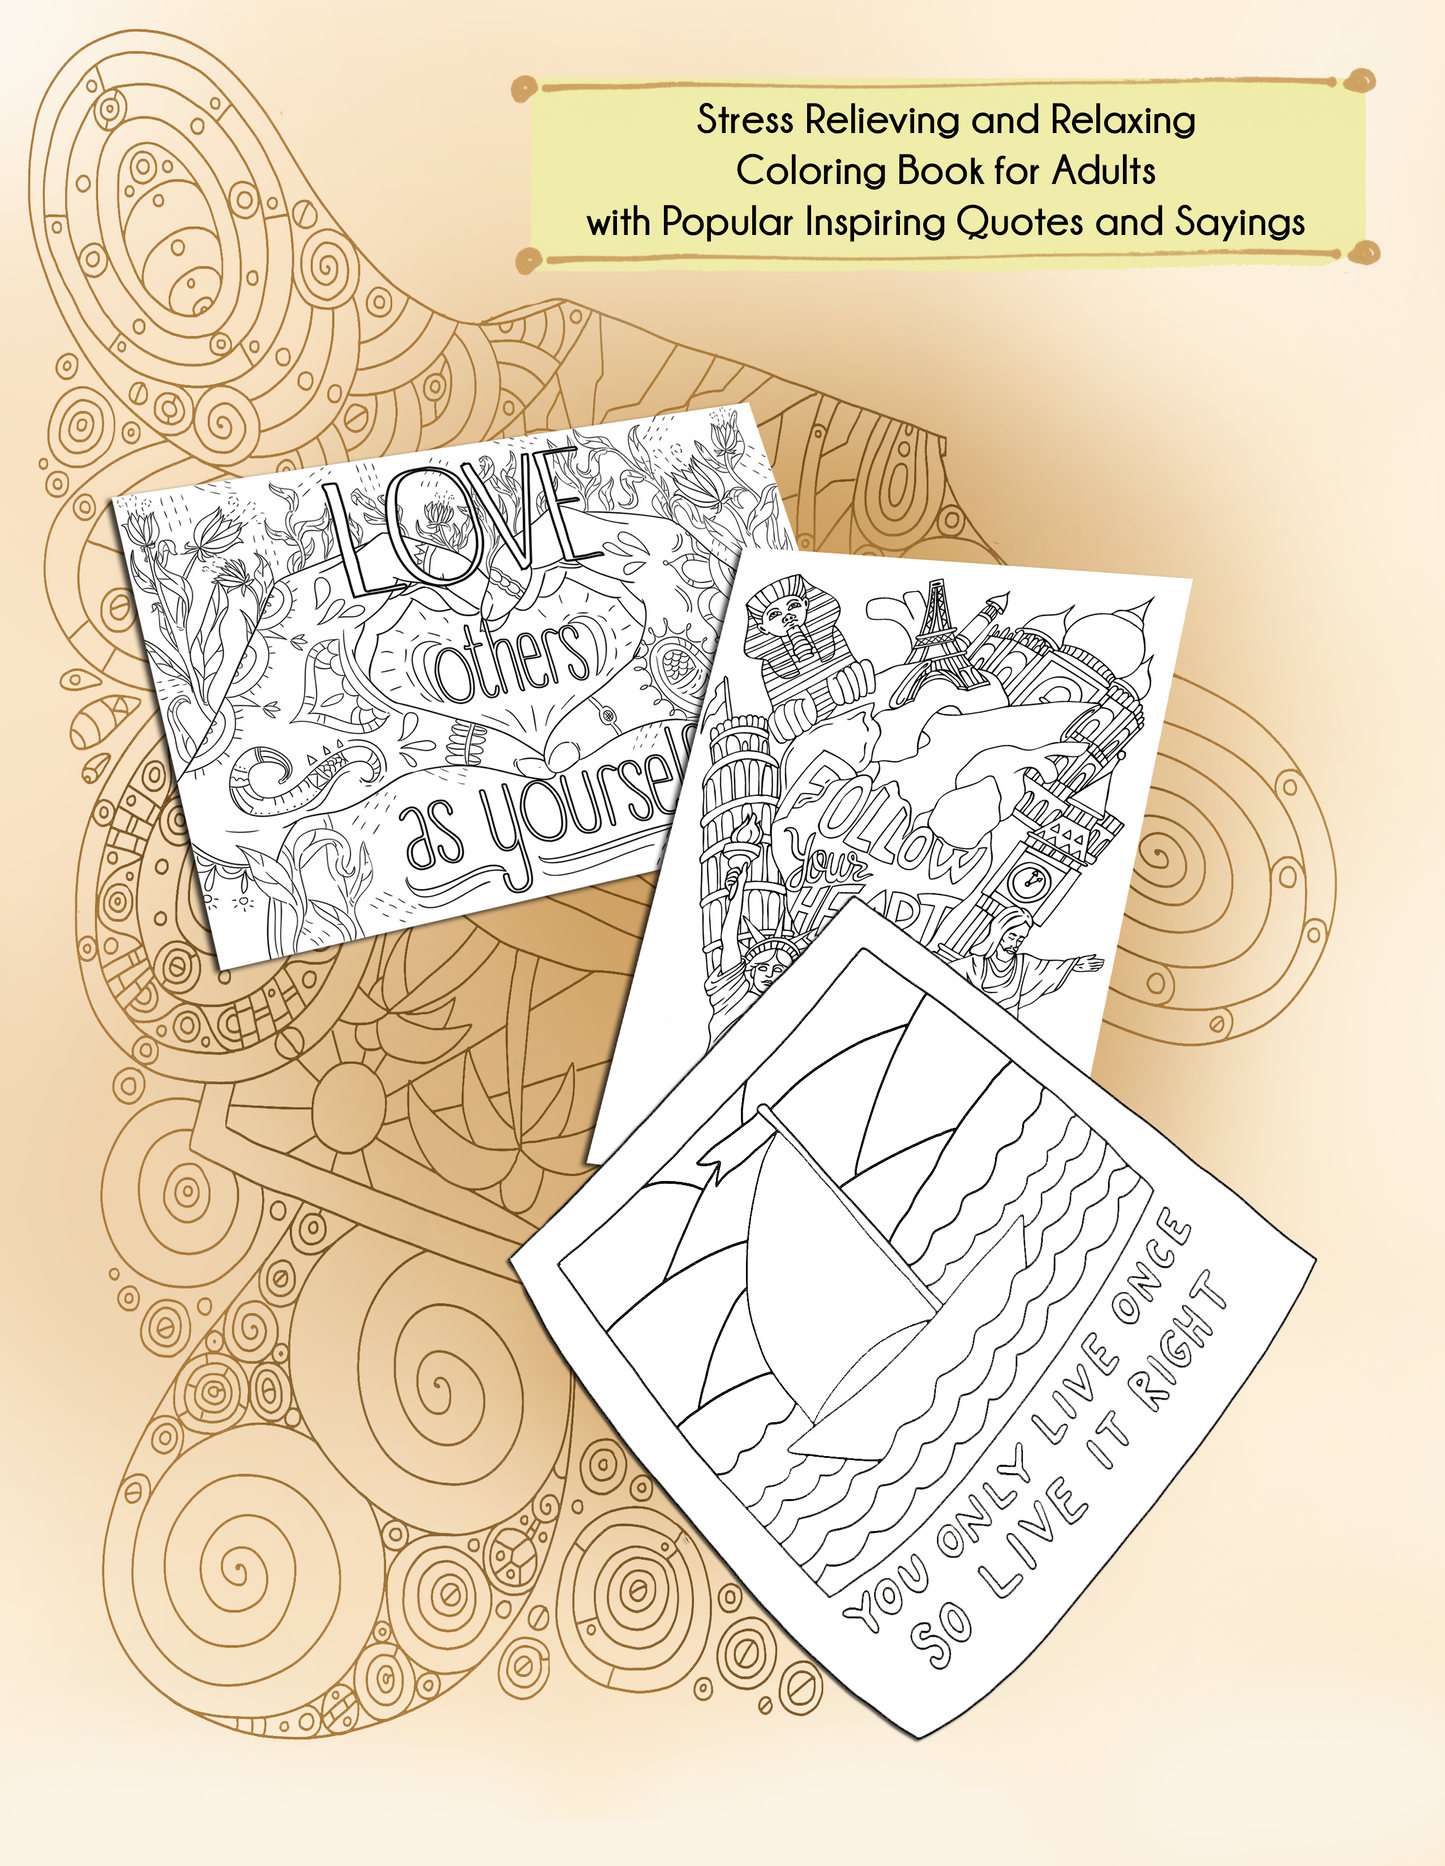 30 Inspirational Coloring Pages With Popular Motivational Quotes And Phrases